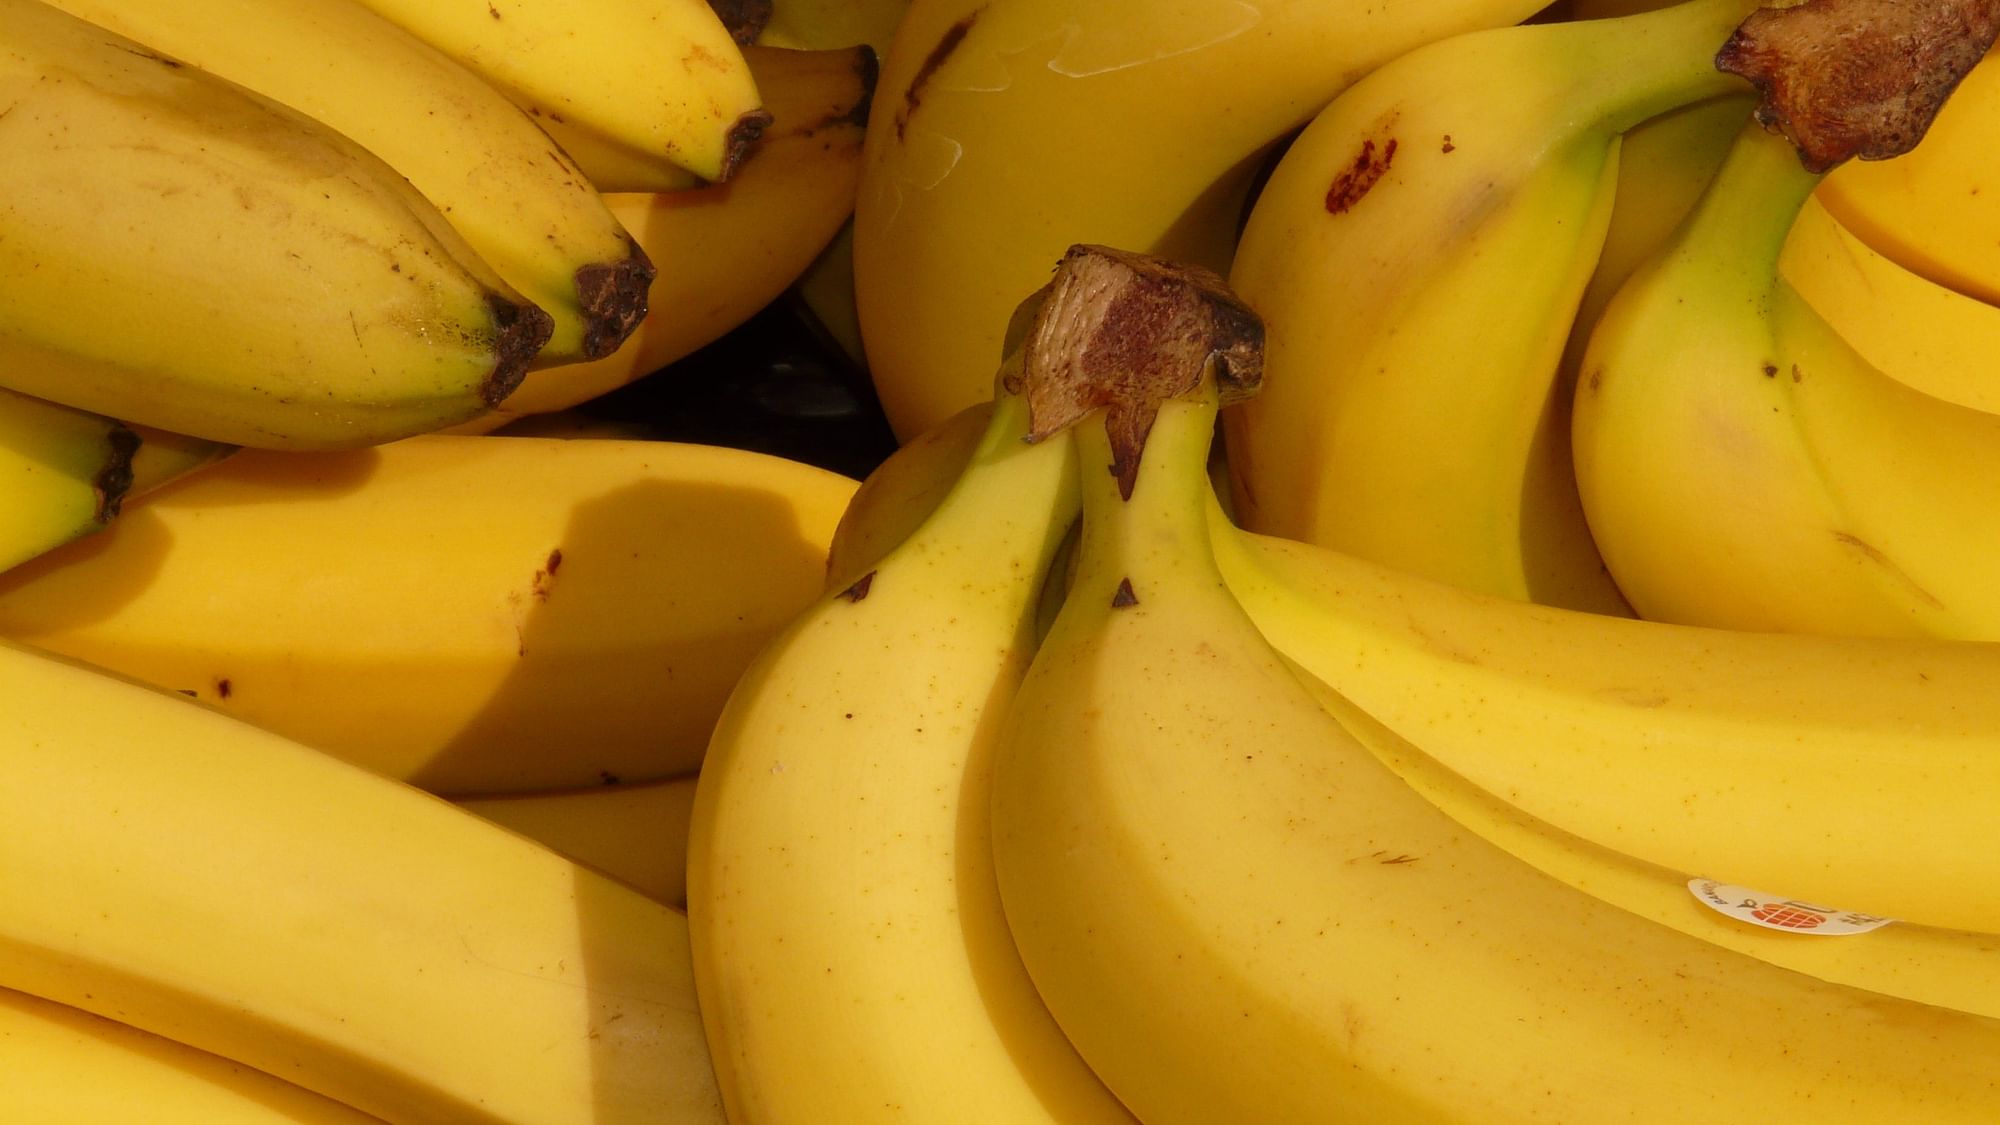 Climate change is leading to the spread of a fungal disease called Black Sigatoka, which is damaging the crop of bananas.